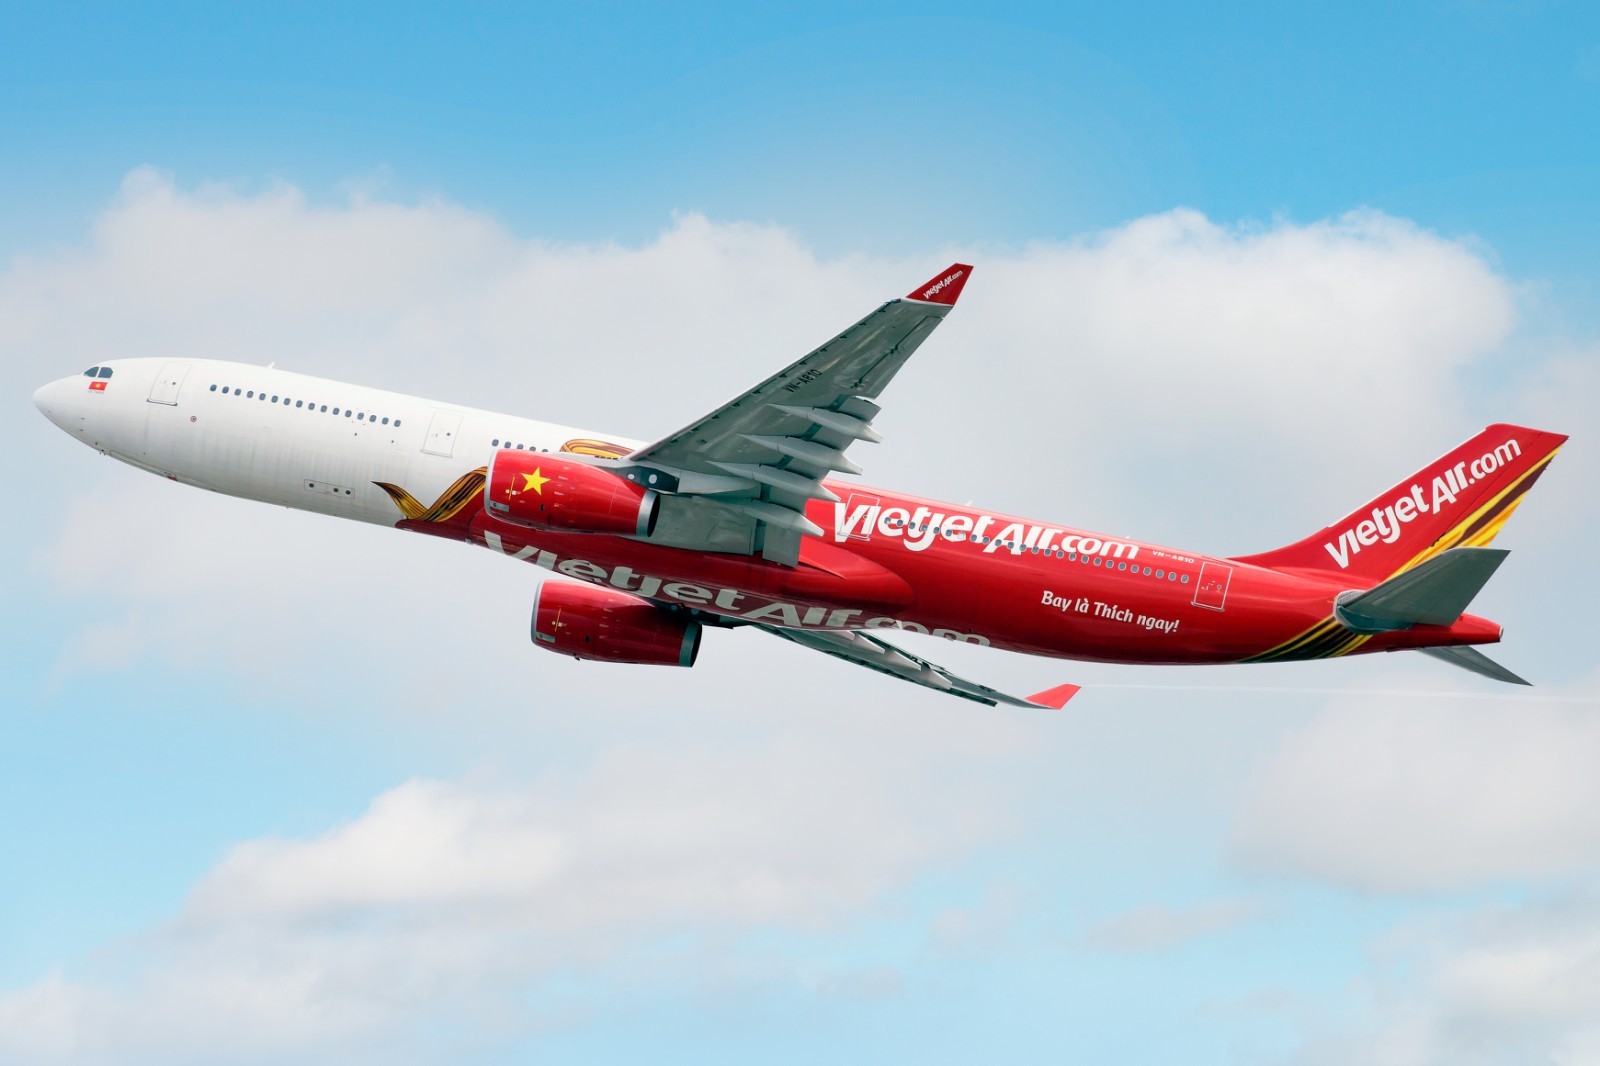 Vietjet Air wins twin crown for its valuable and affordable services